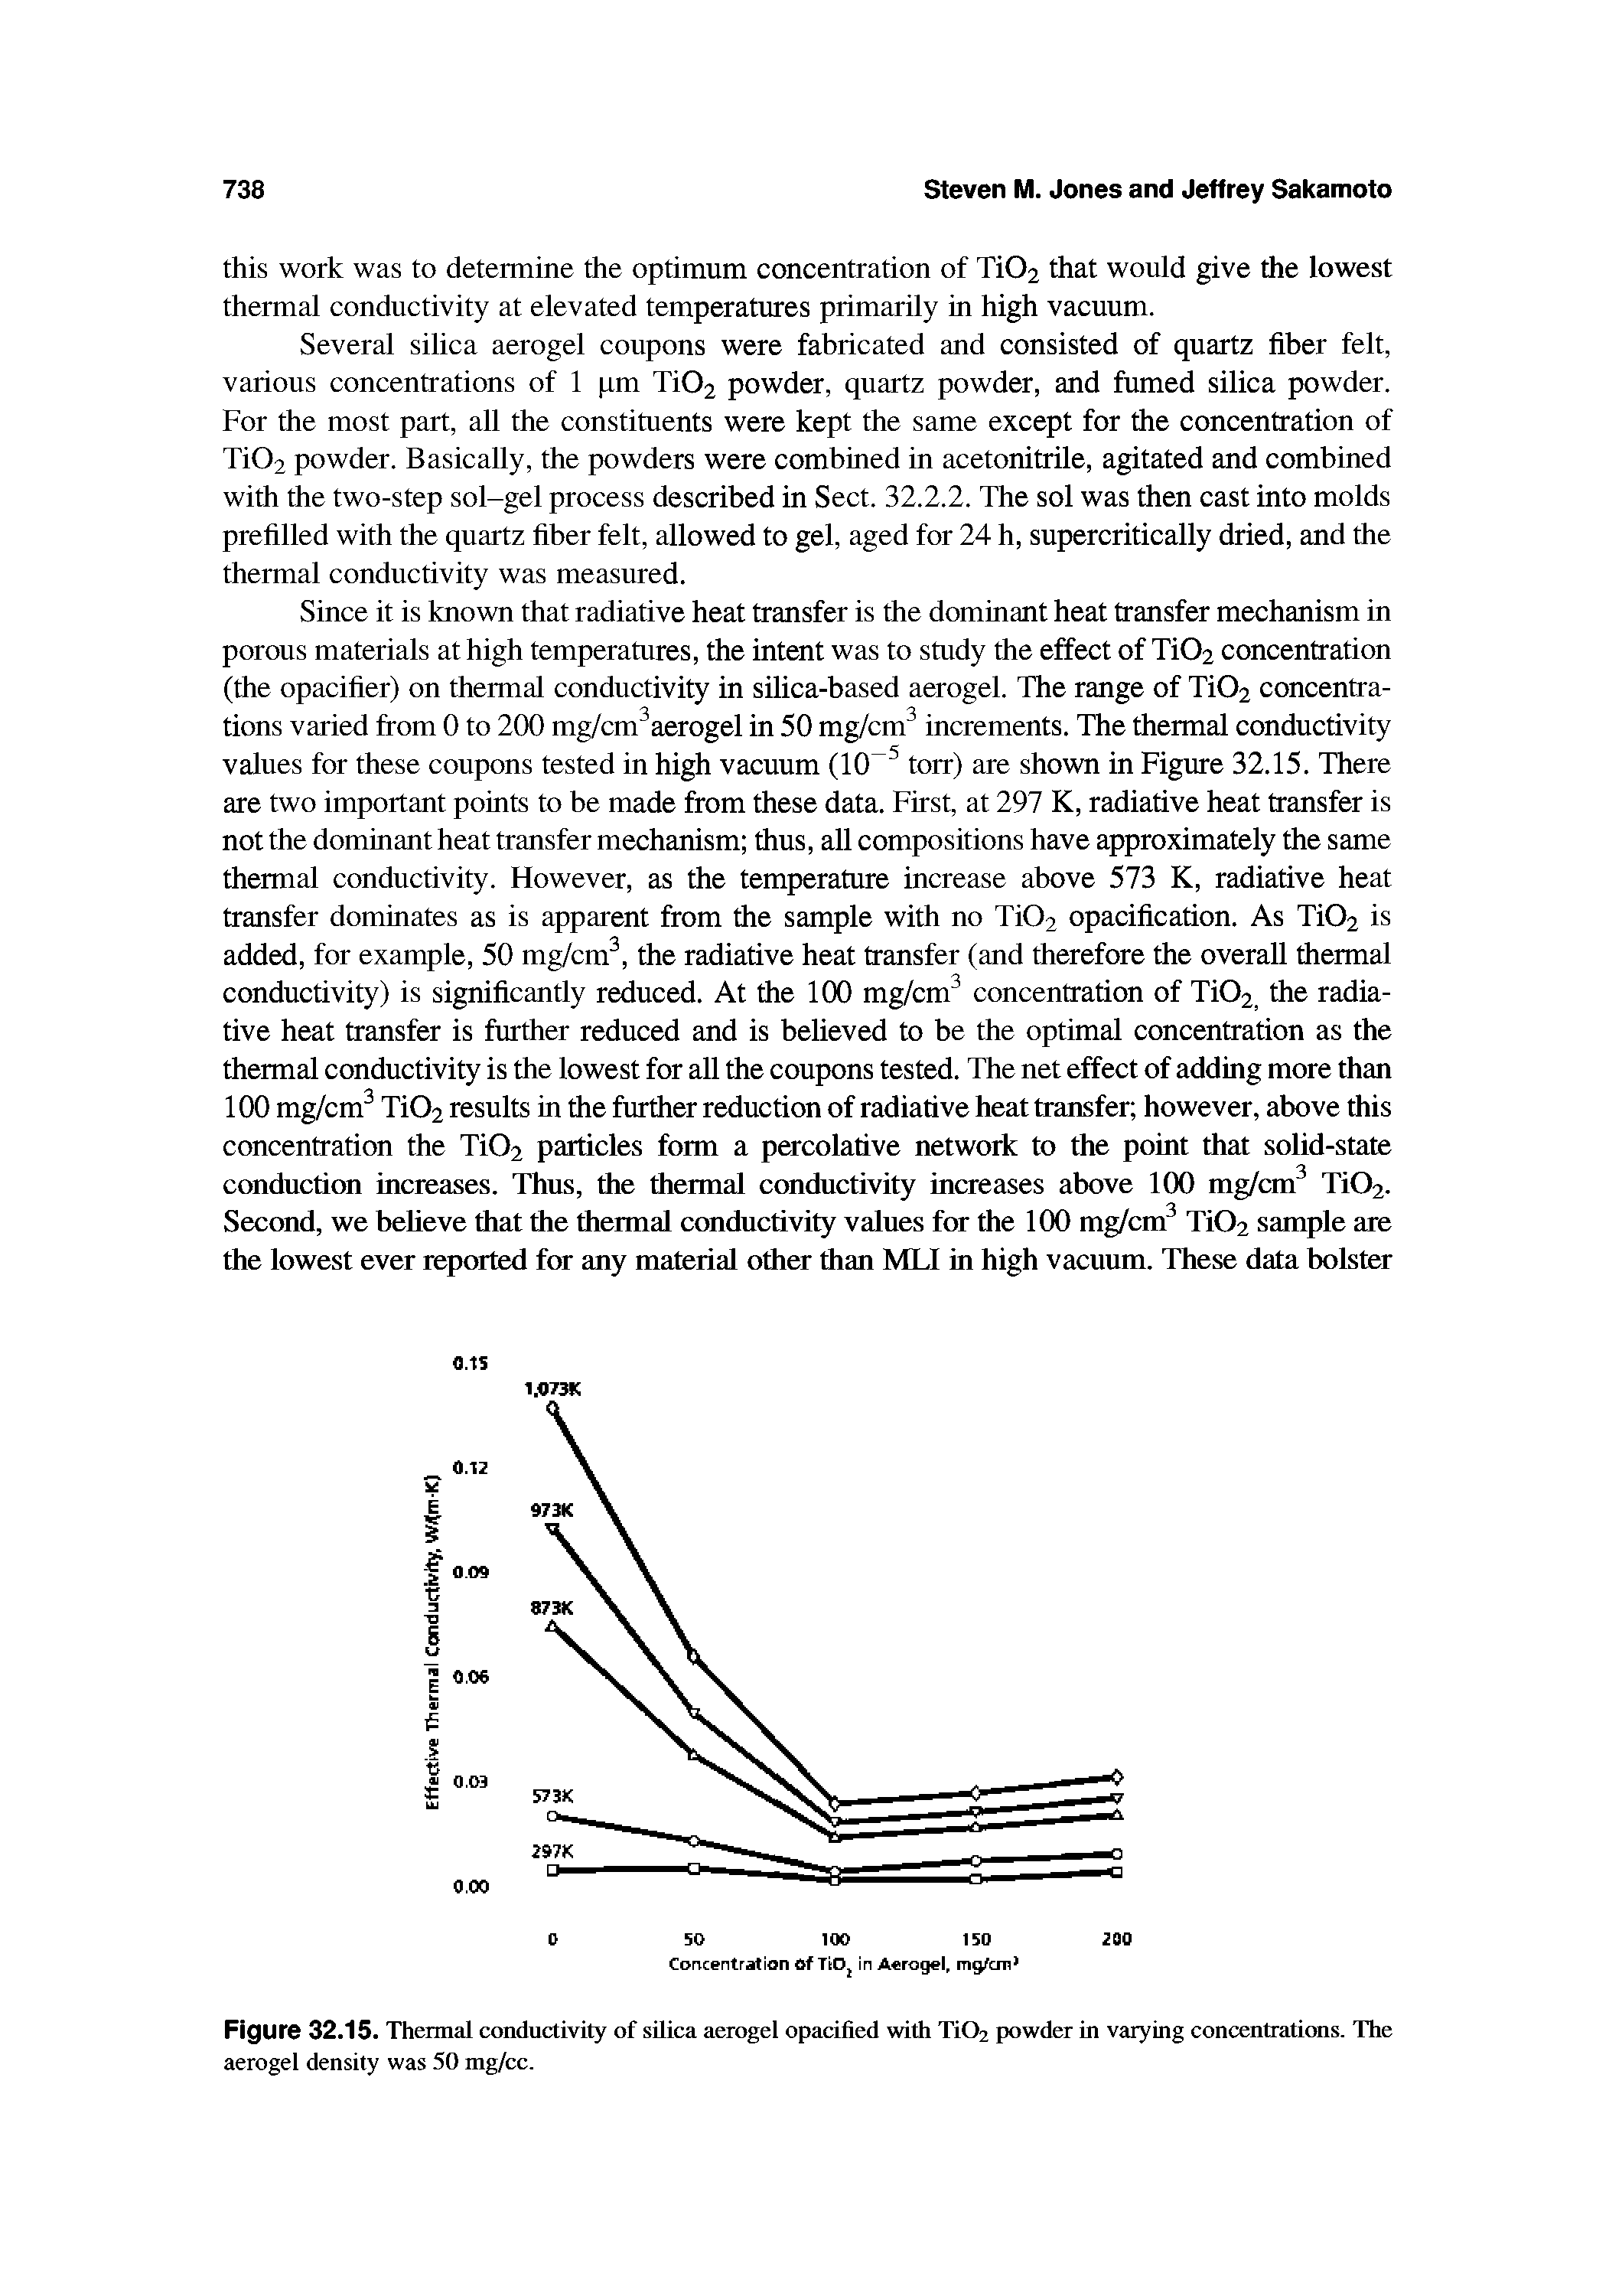 Figure 32.15. Thermal conductivity of siUca aerogel opacified with Ti02 powder in varying concentrations. The aerogel density was 50 mg/cc.